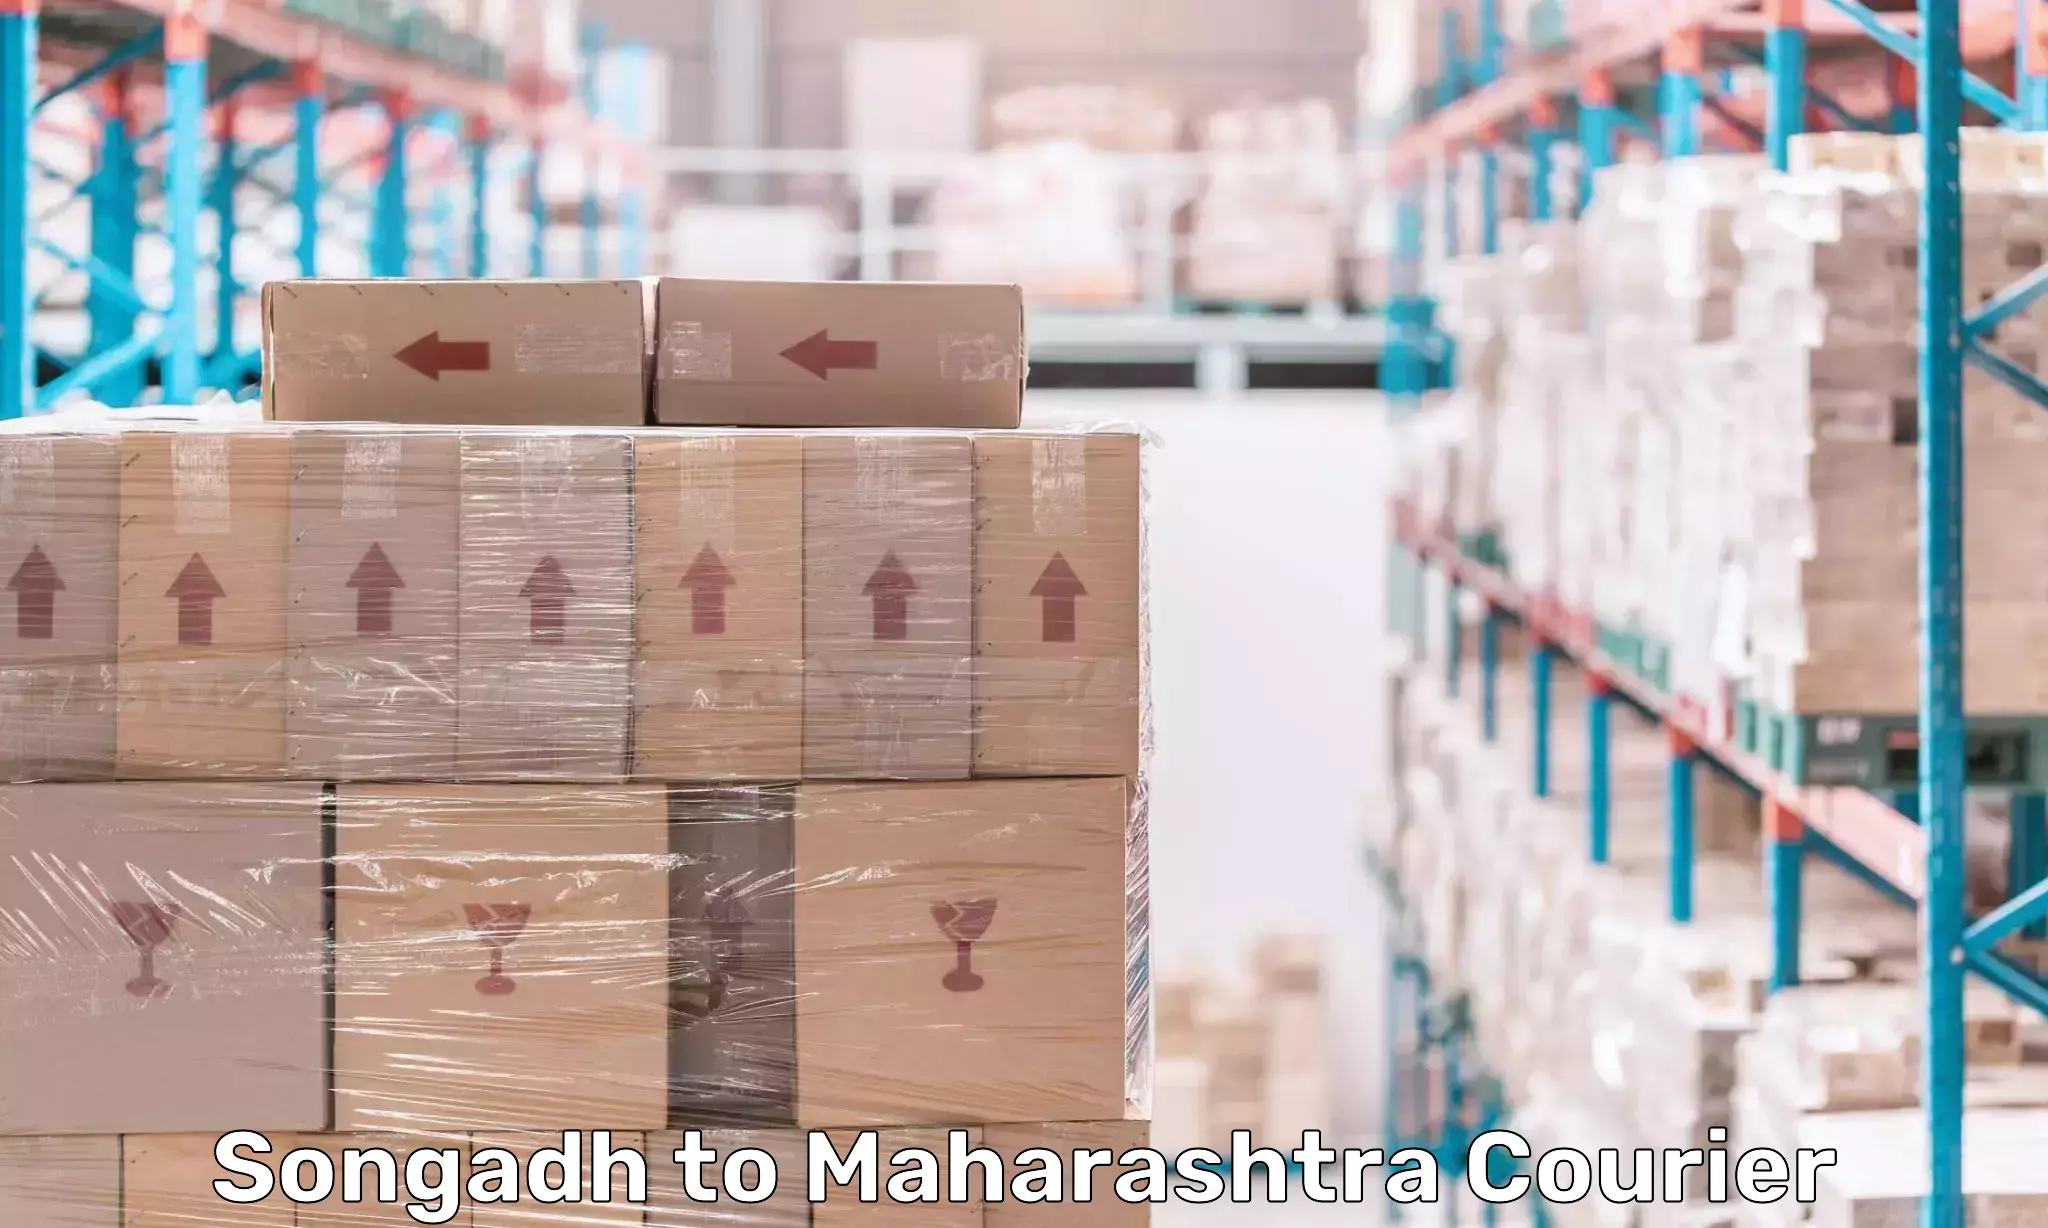 Custom courier packaging in Songadh to Nandura